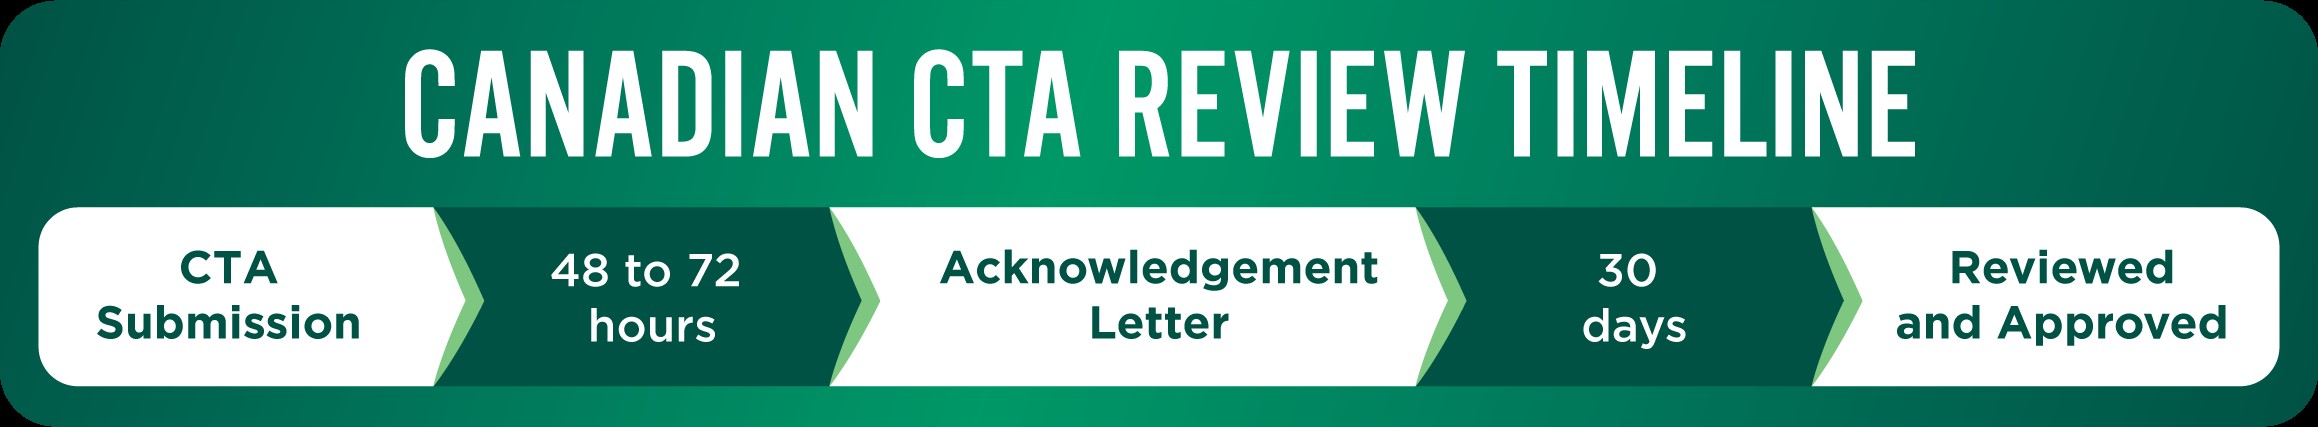 Canadian CTA Review Timeline